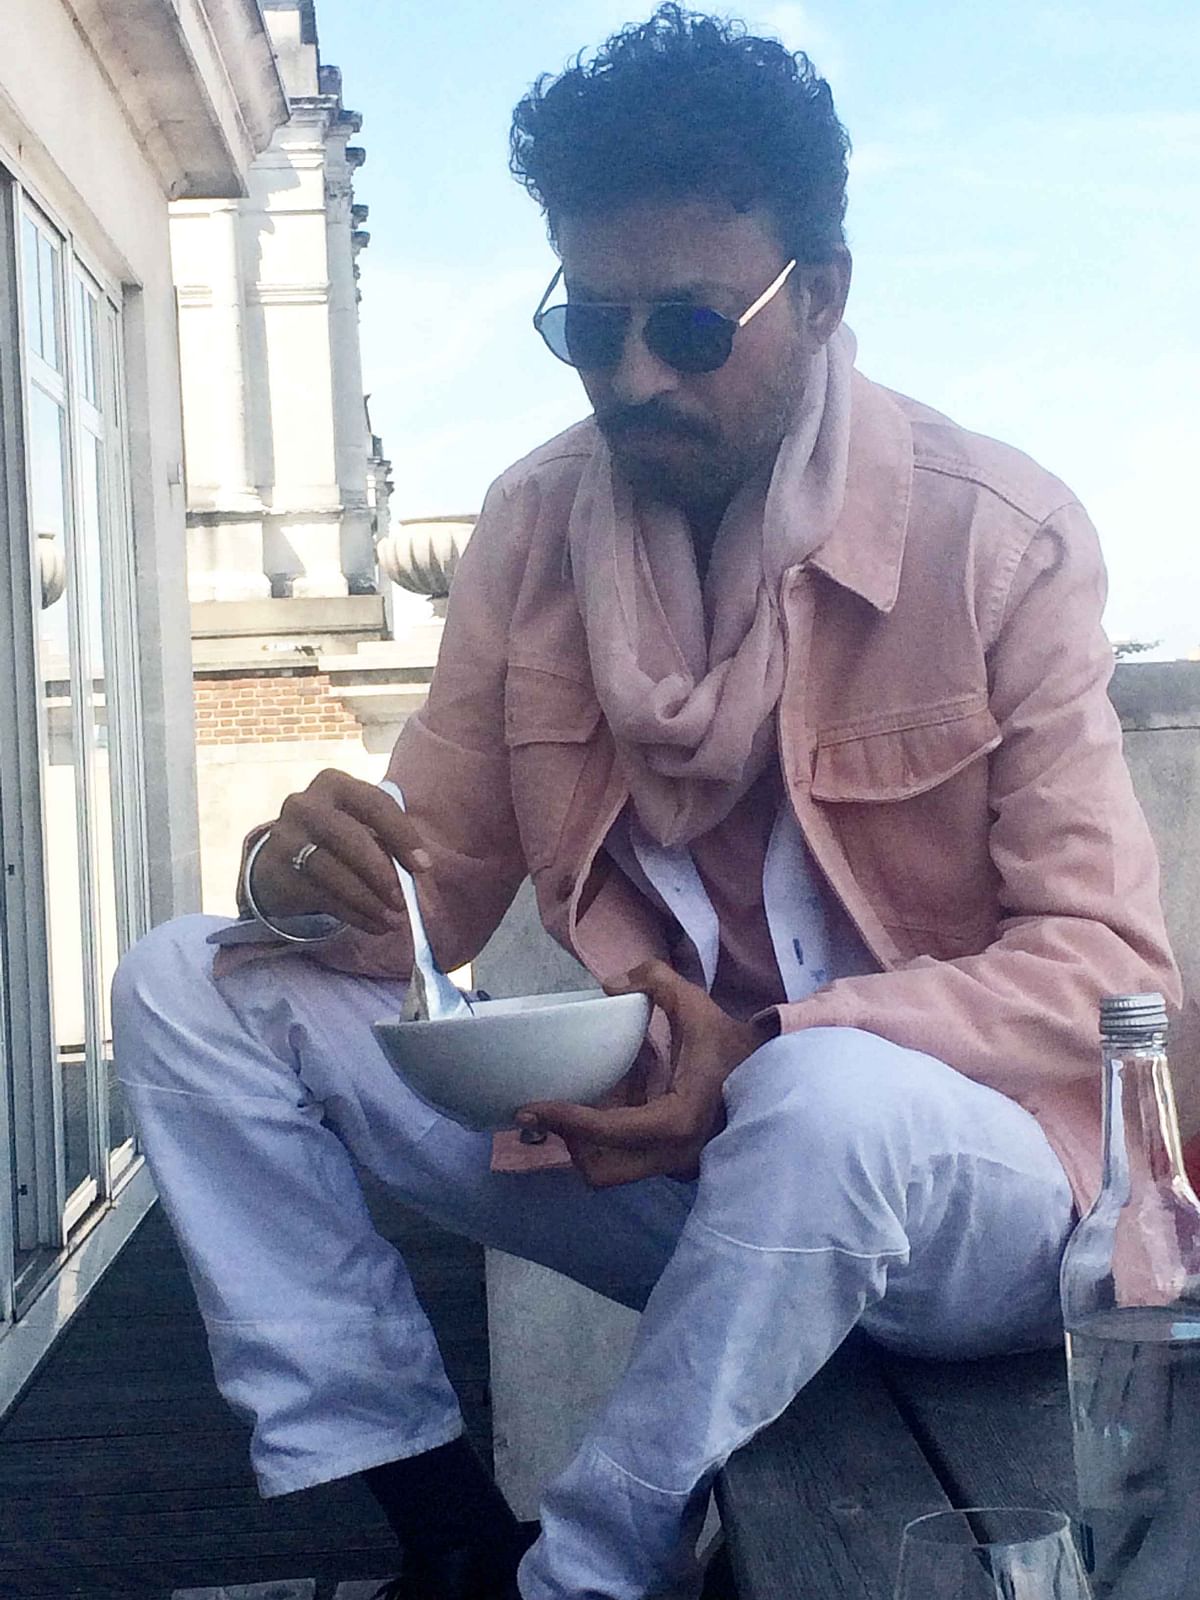 Irrfan Khan says he has surrendered to his fate, and trusts God, irrespective of the outcome.